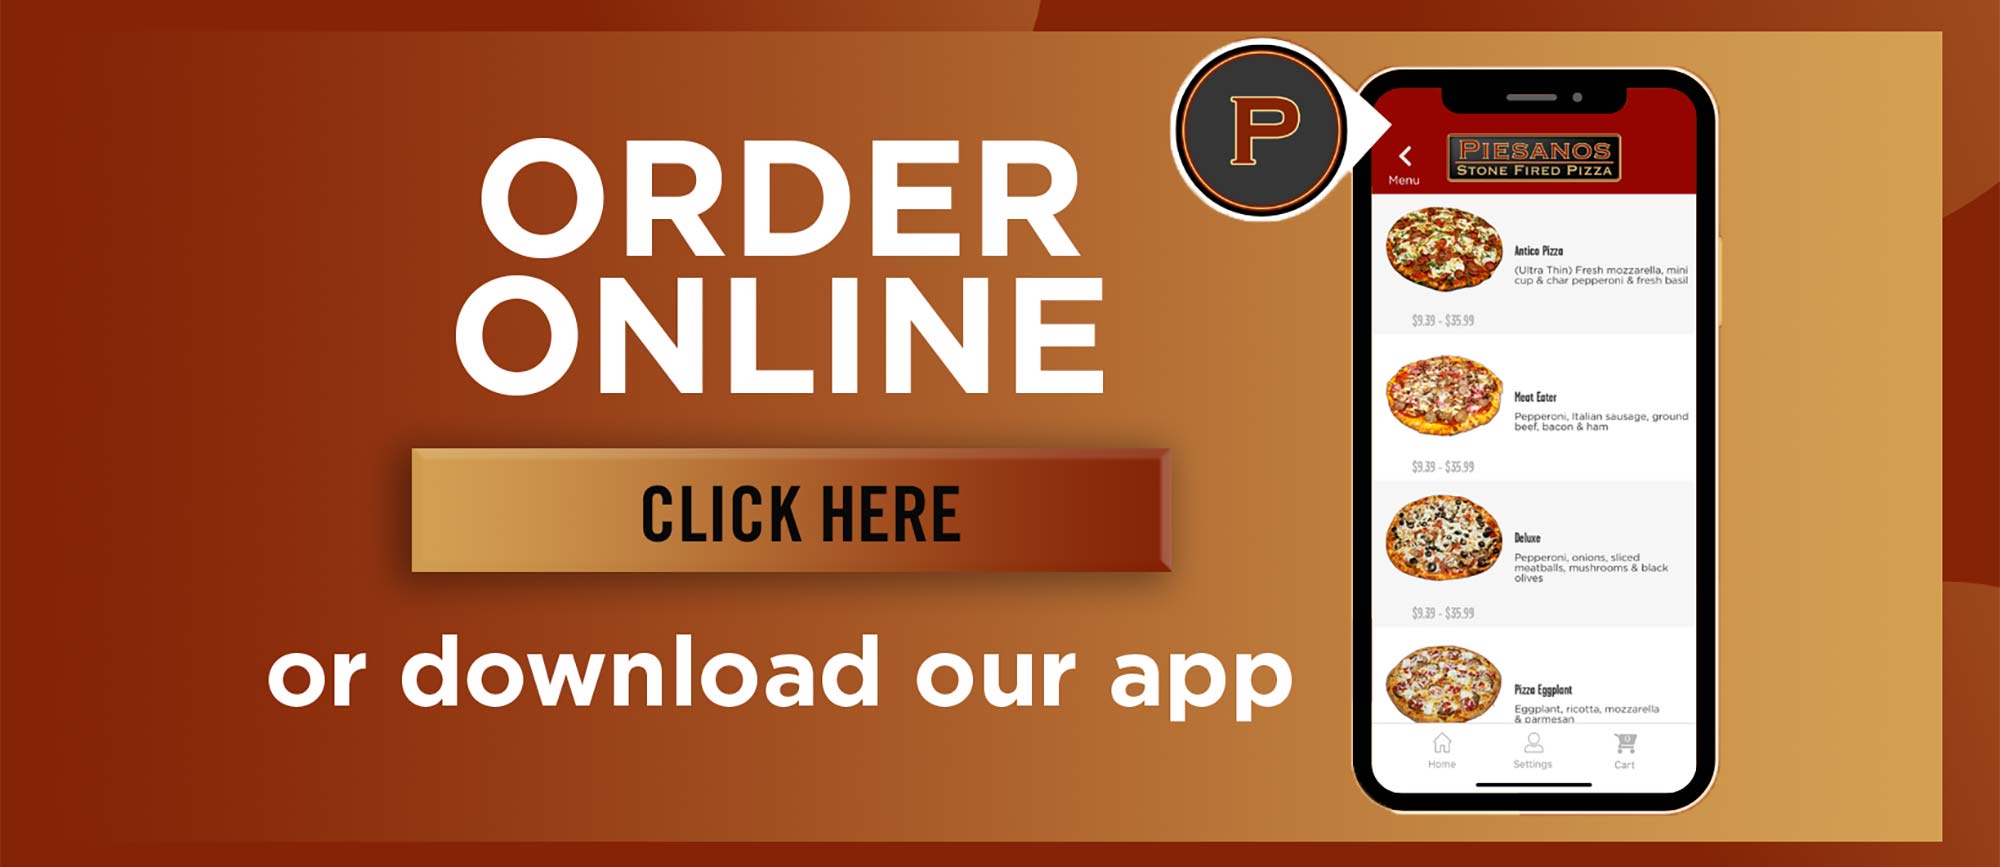 Download our app to make ordering even easier and get special discounts!